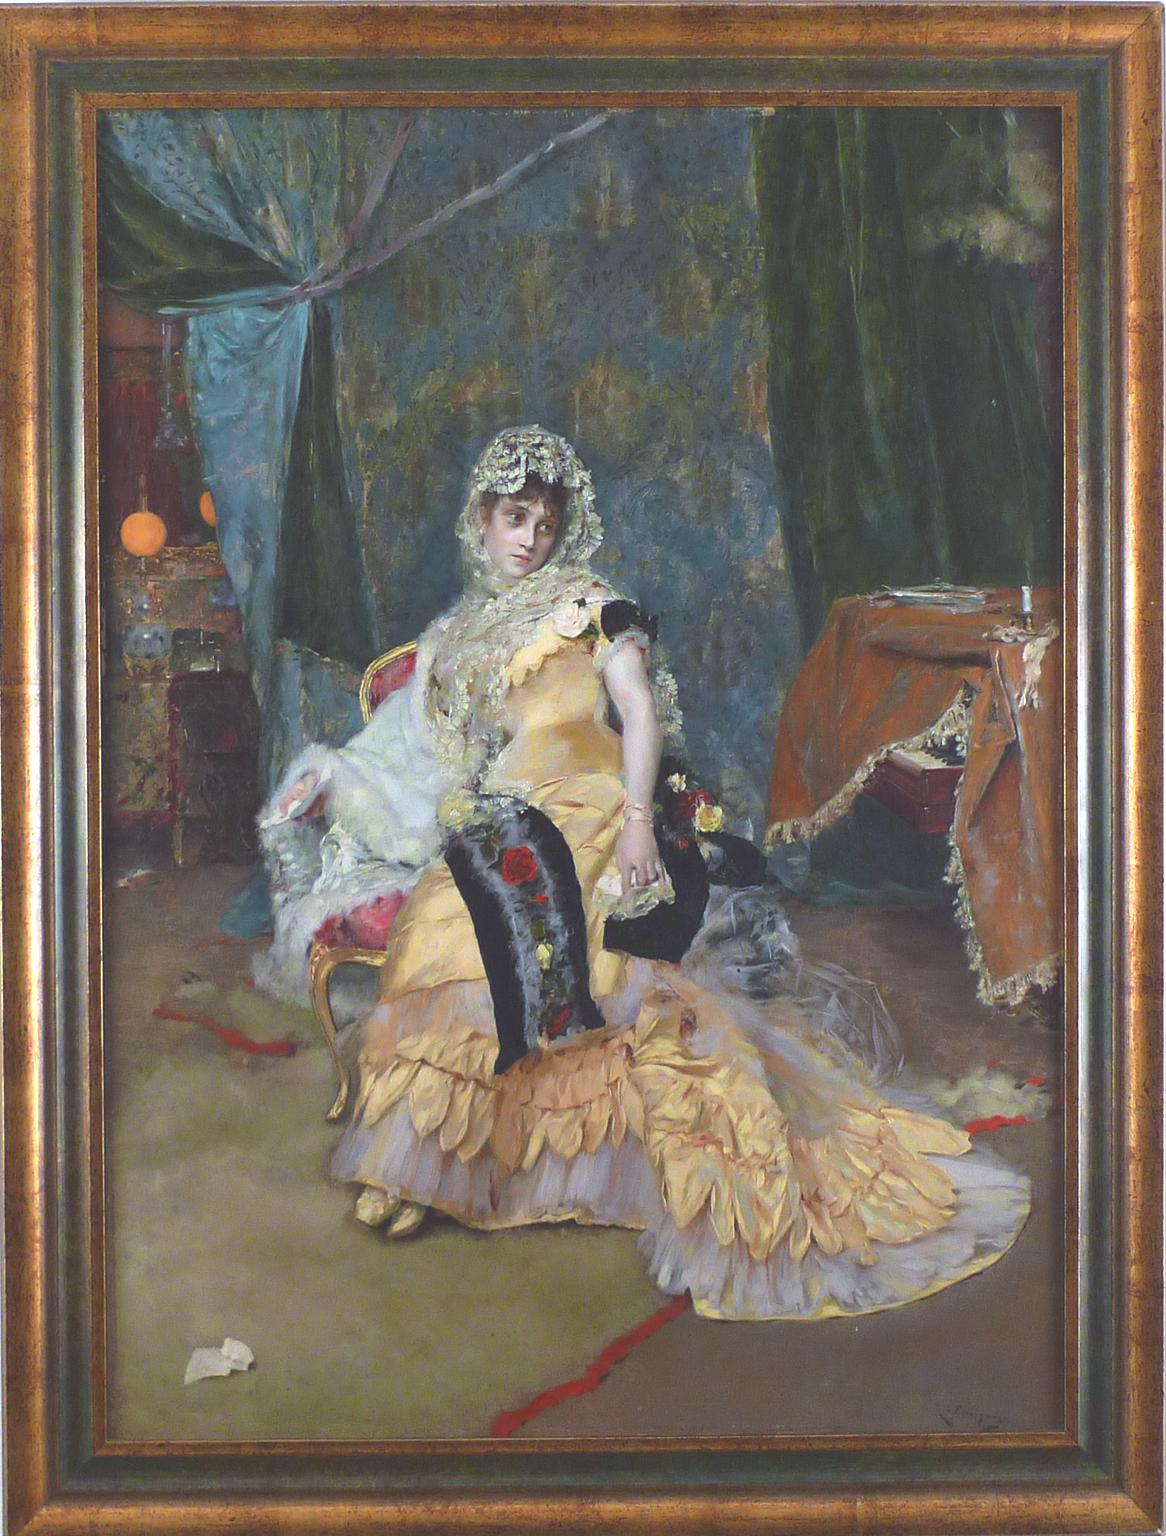 "Lady in yellow", 19th Century oil on panel by Rogelio de Egusquiza y Barrena